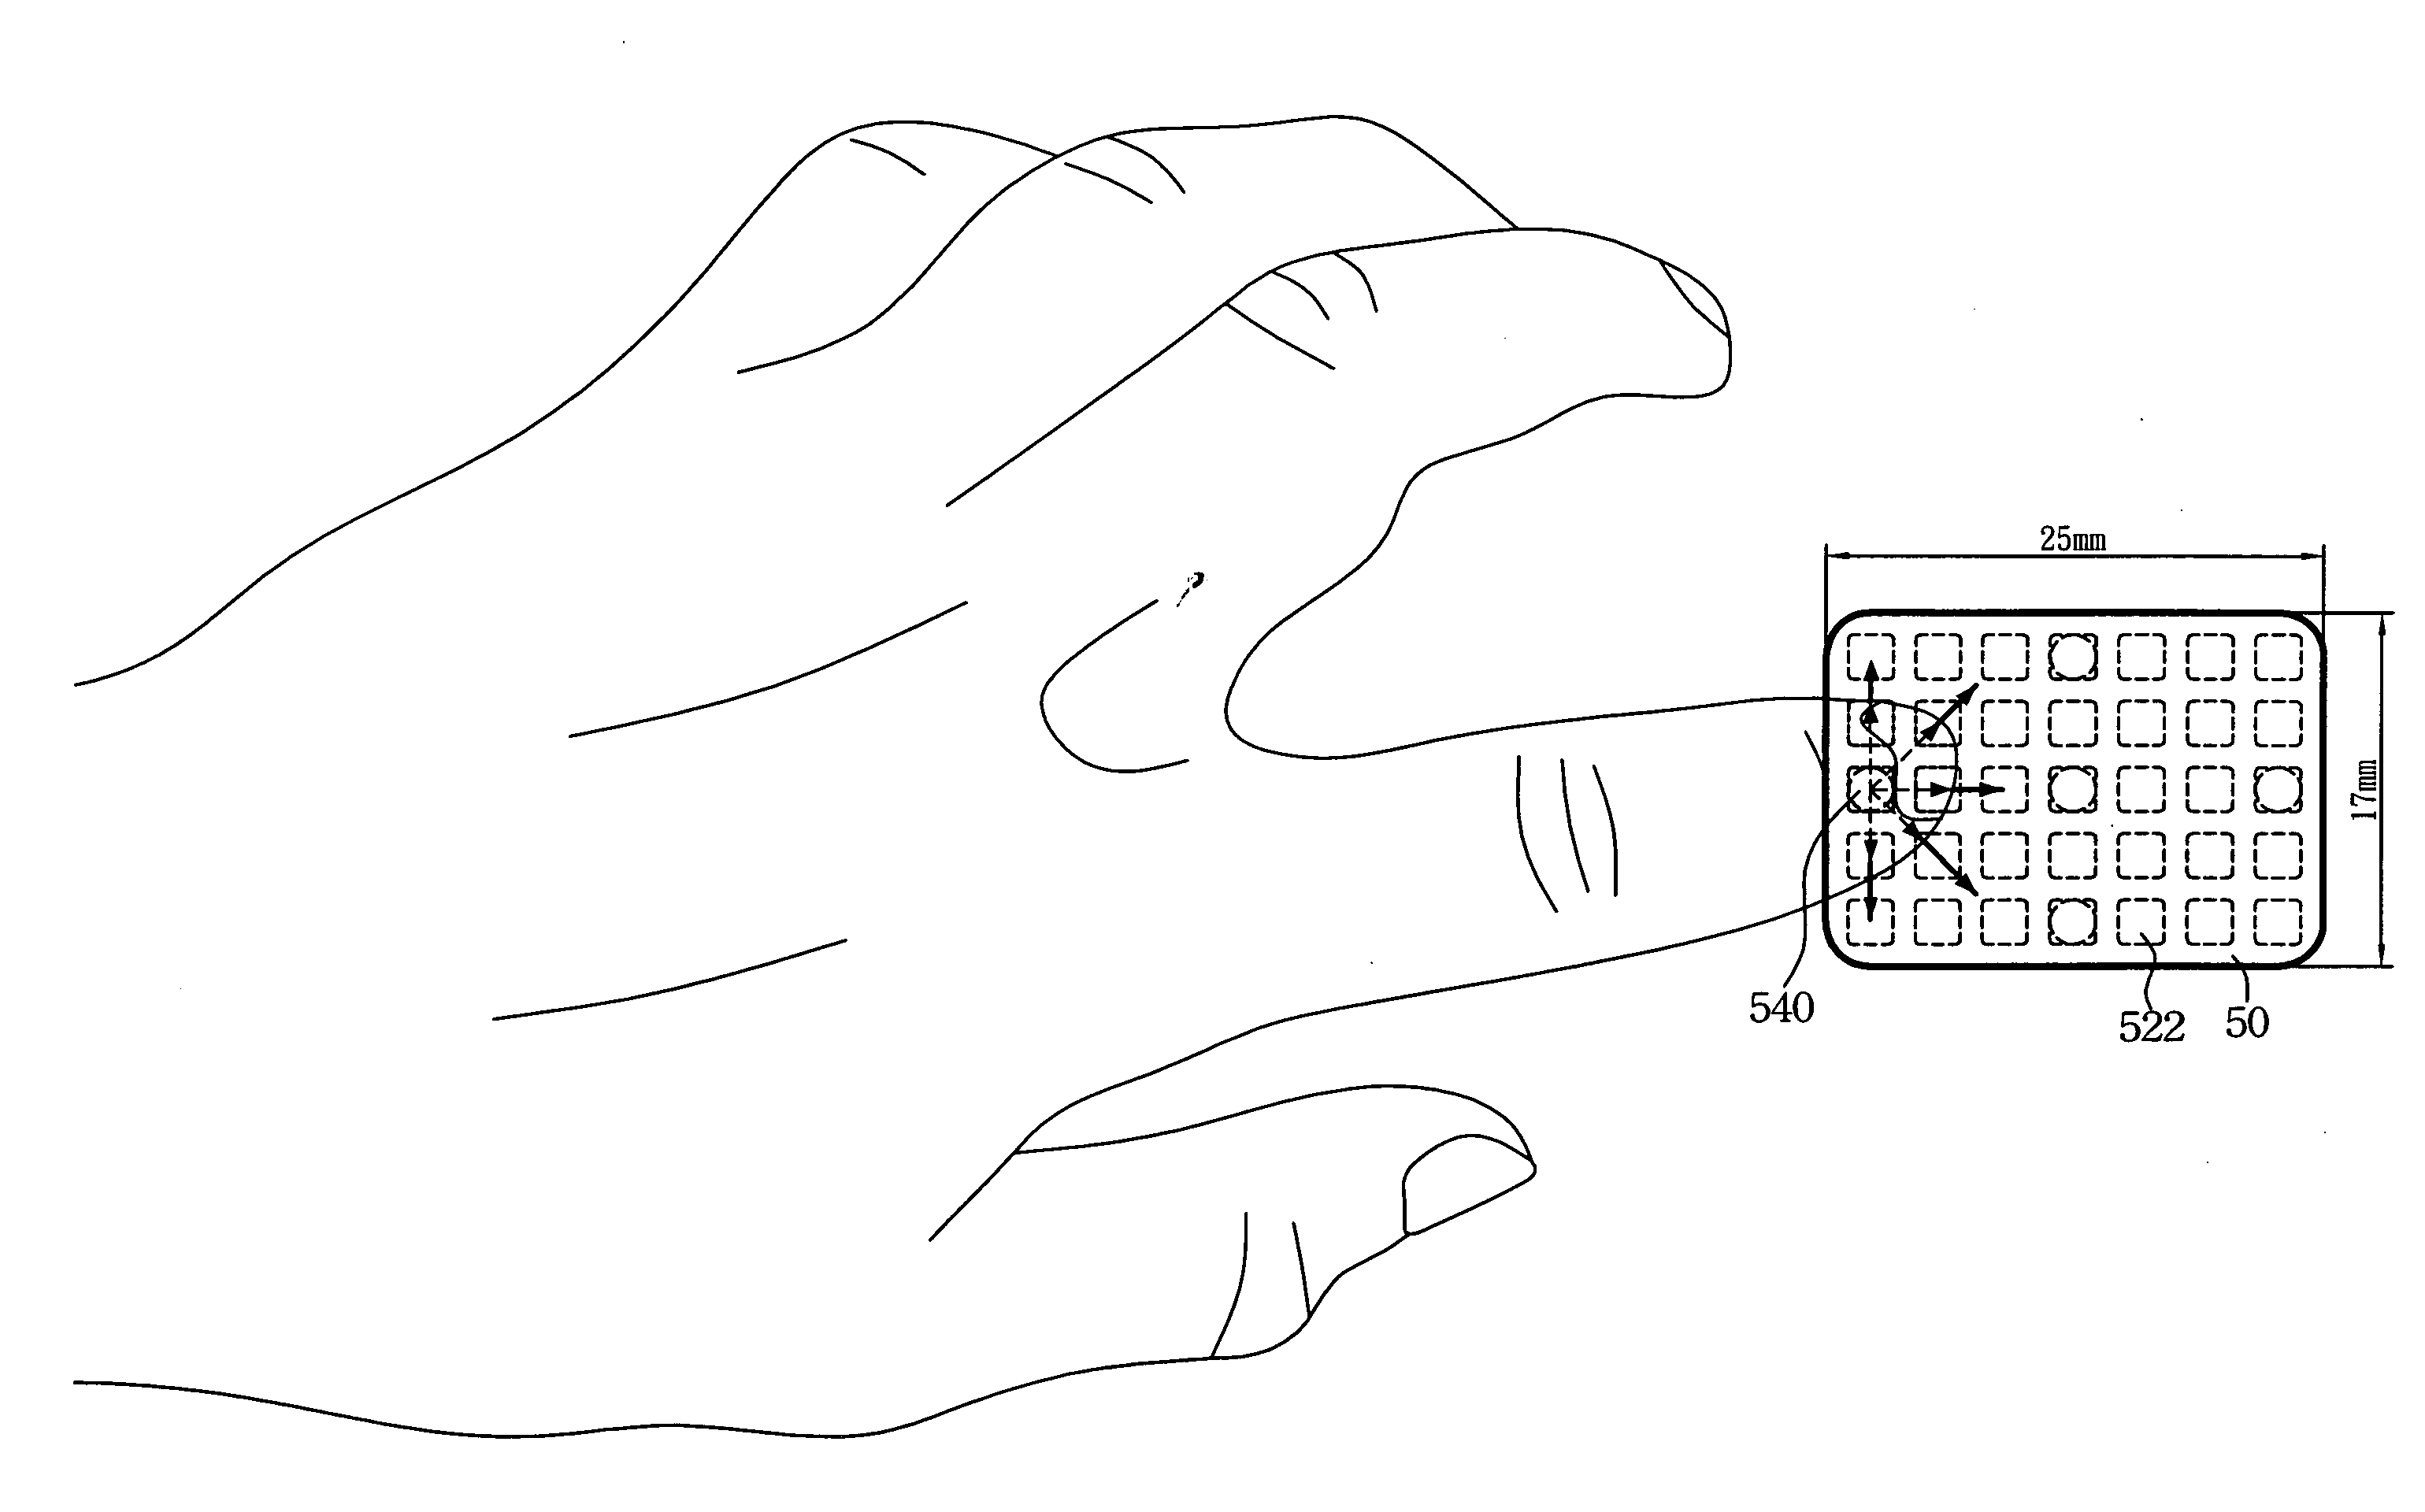 Touch pad device